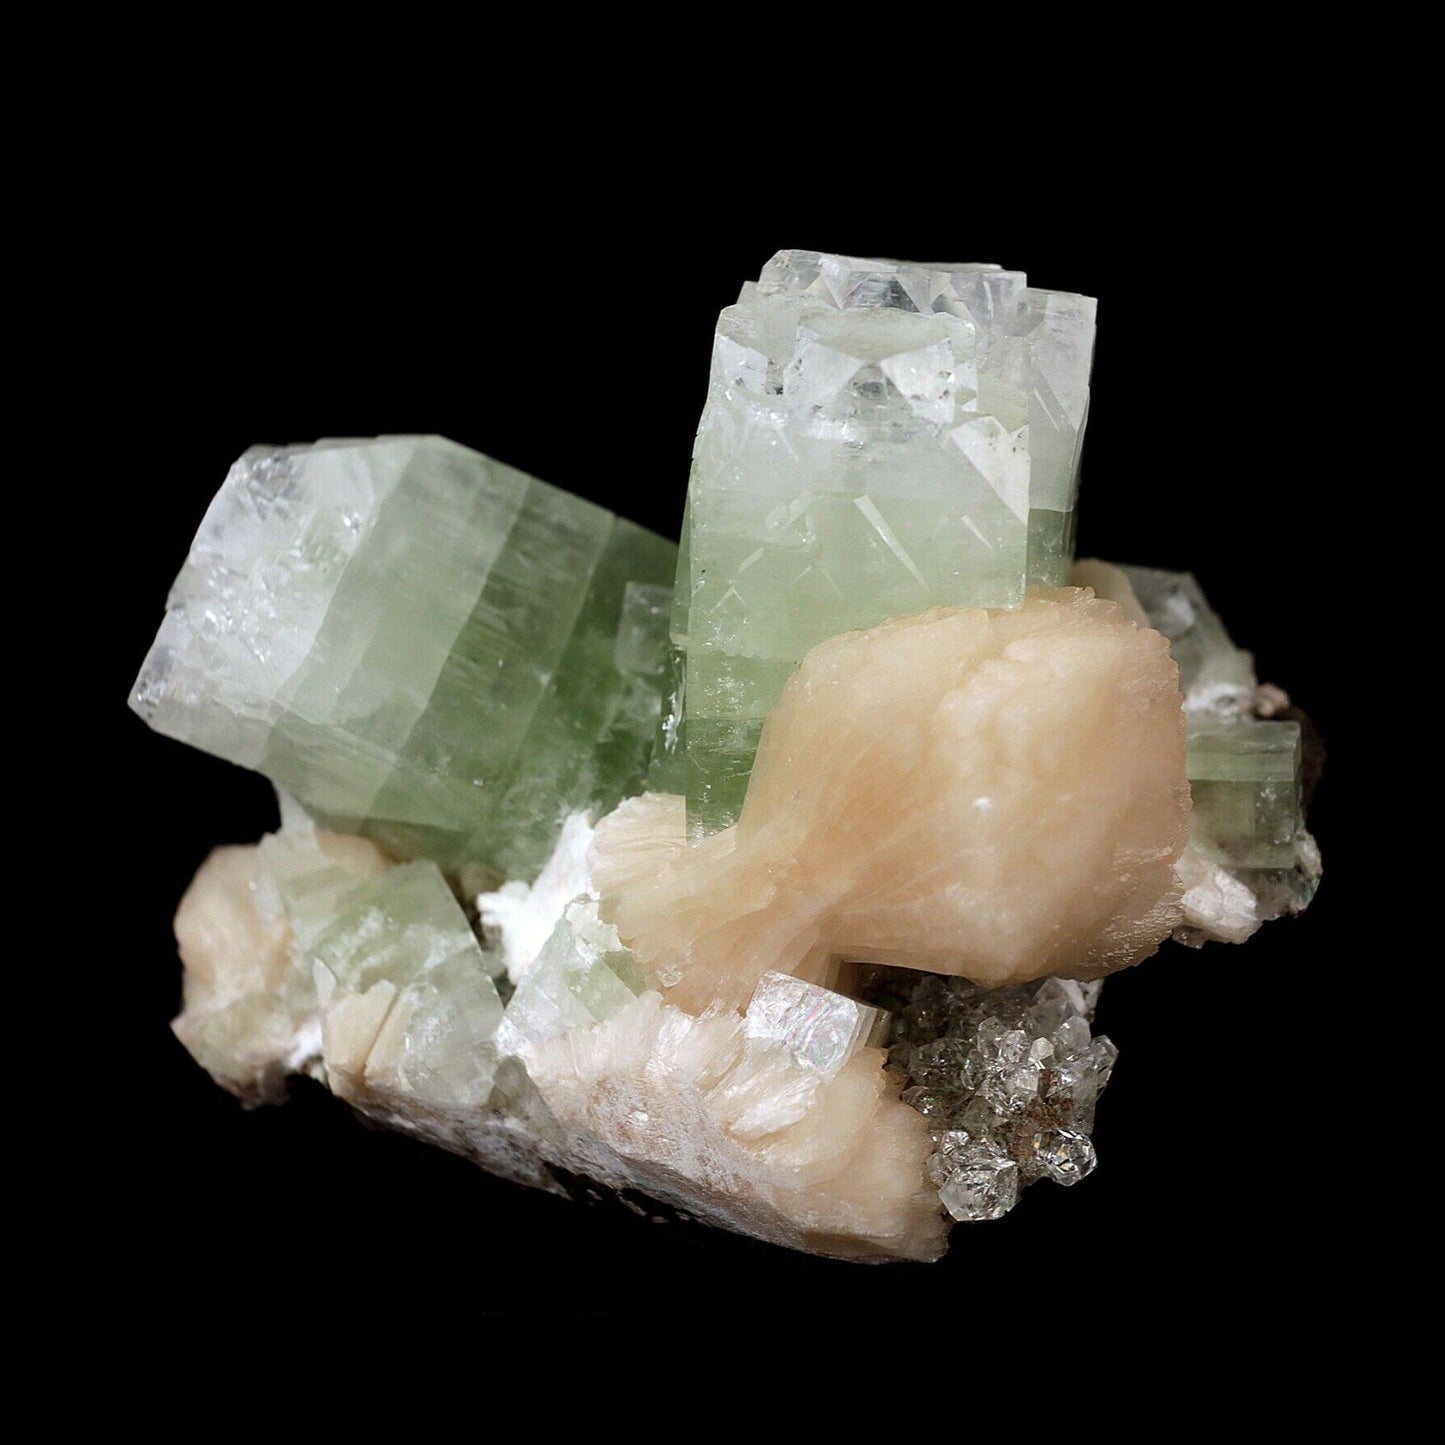 Apophyllite green crystal with Stilbite Natural Mineral Specimen # B 3…  https://www.superbminerals.us/products/apophyllite-green-crystal-with-stilbite-natural-mineral-specimen-b-3607  Features:Two large, green apophyllite cubes in 'V' formation with strong green shade. along with pink Stilbite bow shape formation. Primary Mineral(s): ApophylliteSecondary Mineral(s): StilbiteMatrix: N/A12 cm x 9 cm860 GmsLocality: Nashik, Maharashtra, IndiaYear of Discovery: 2020